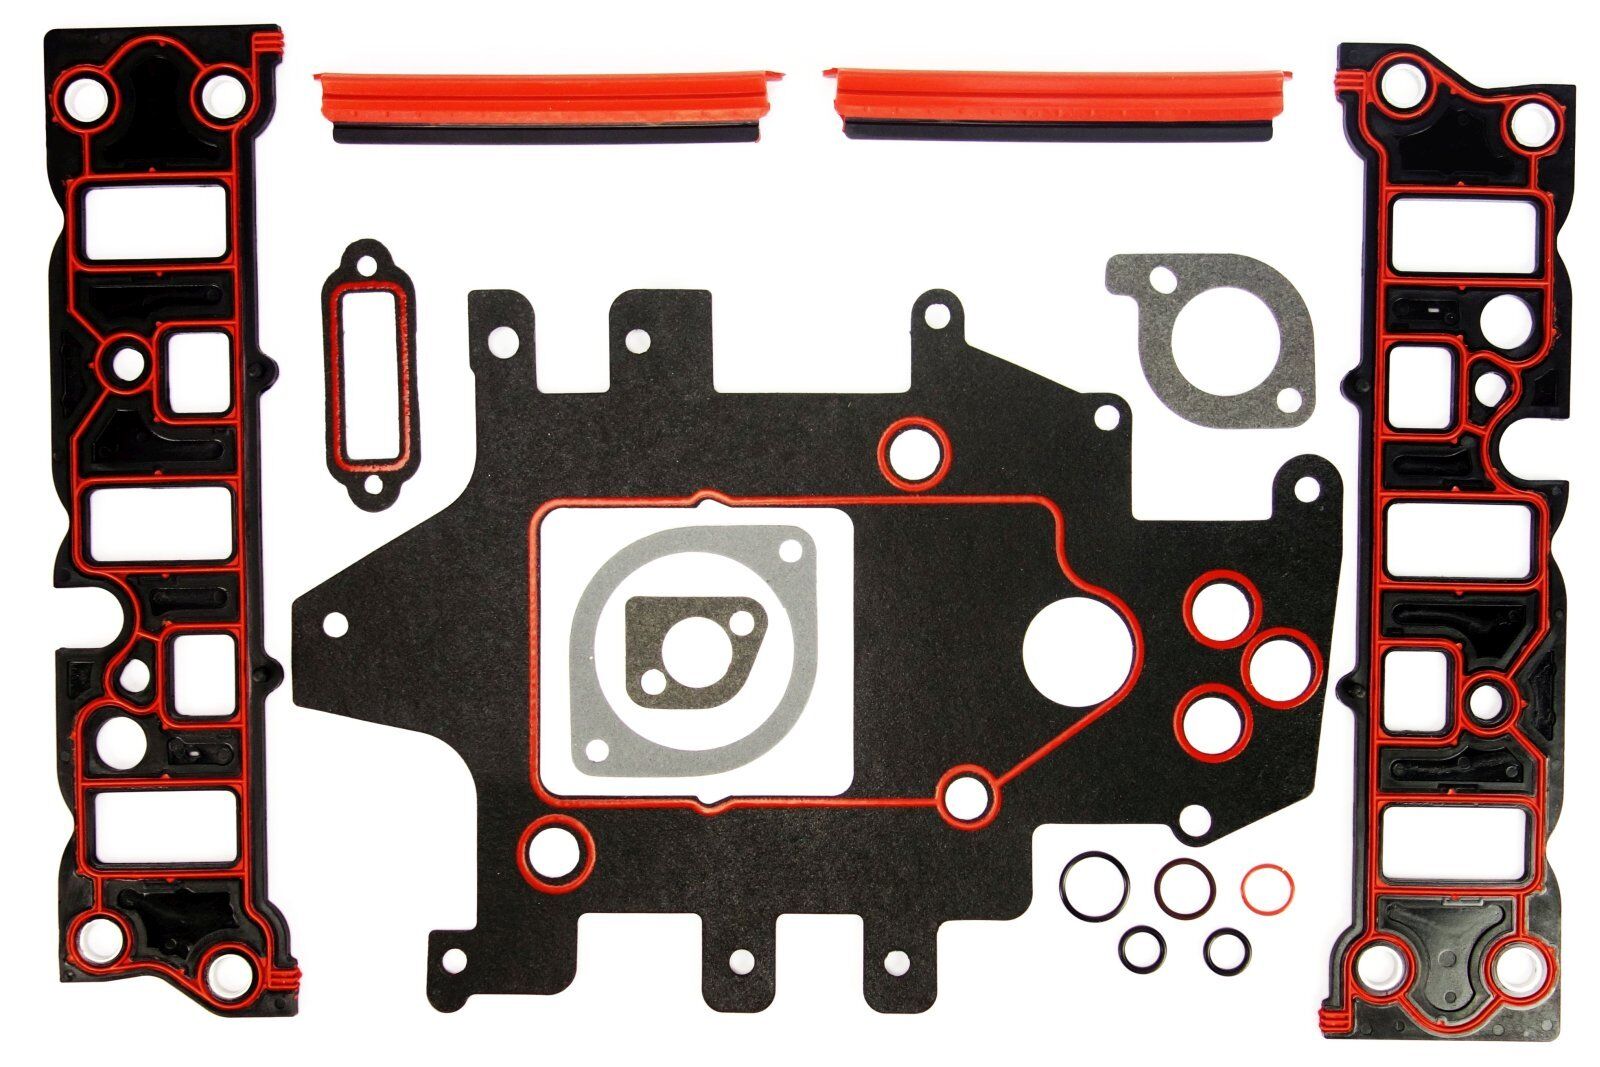 Inlet Intake Manifold Gasket kit for COMMODORE VT VX VU VY SUPERCHARGED V6 3.8L 